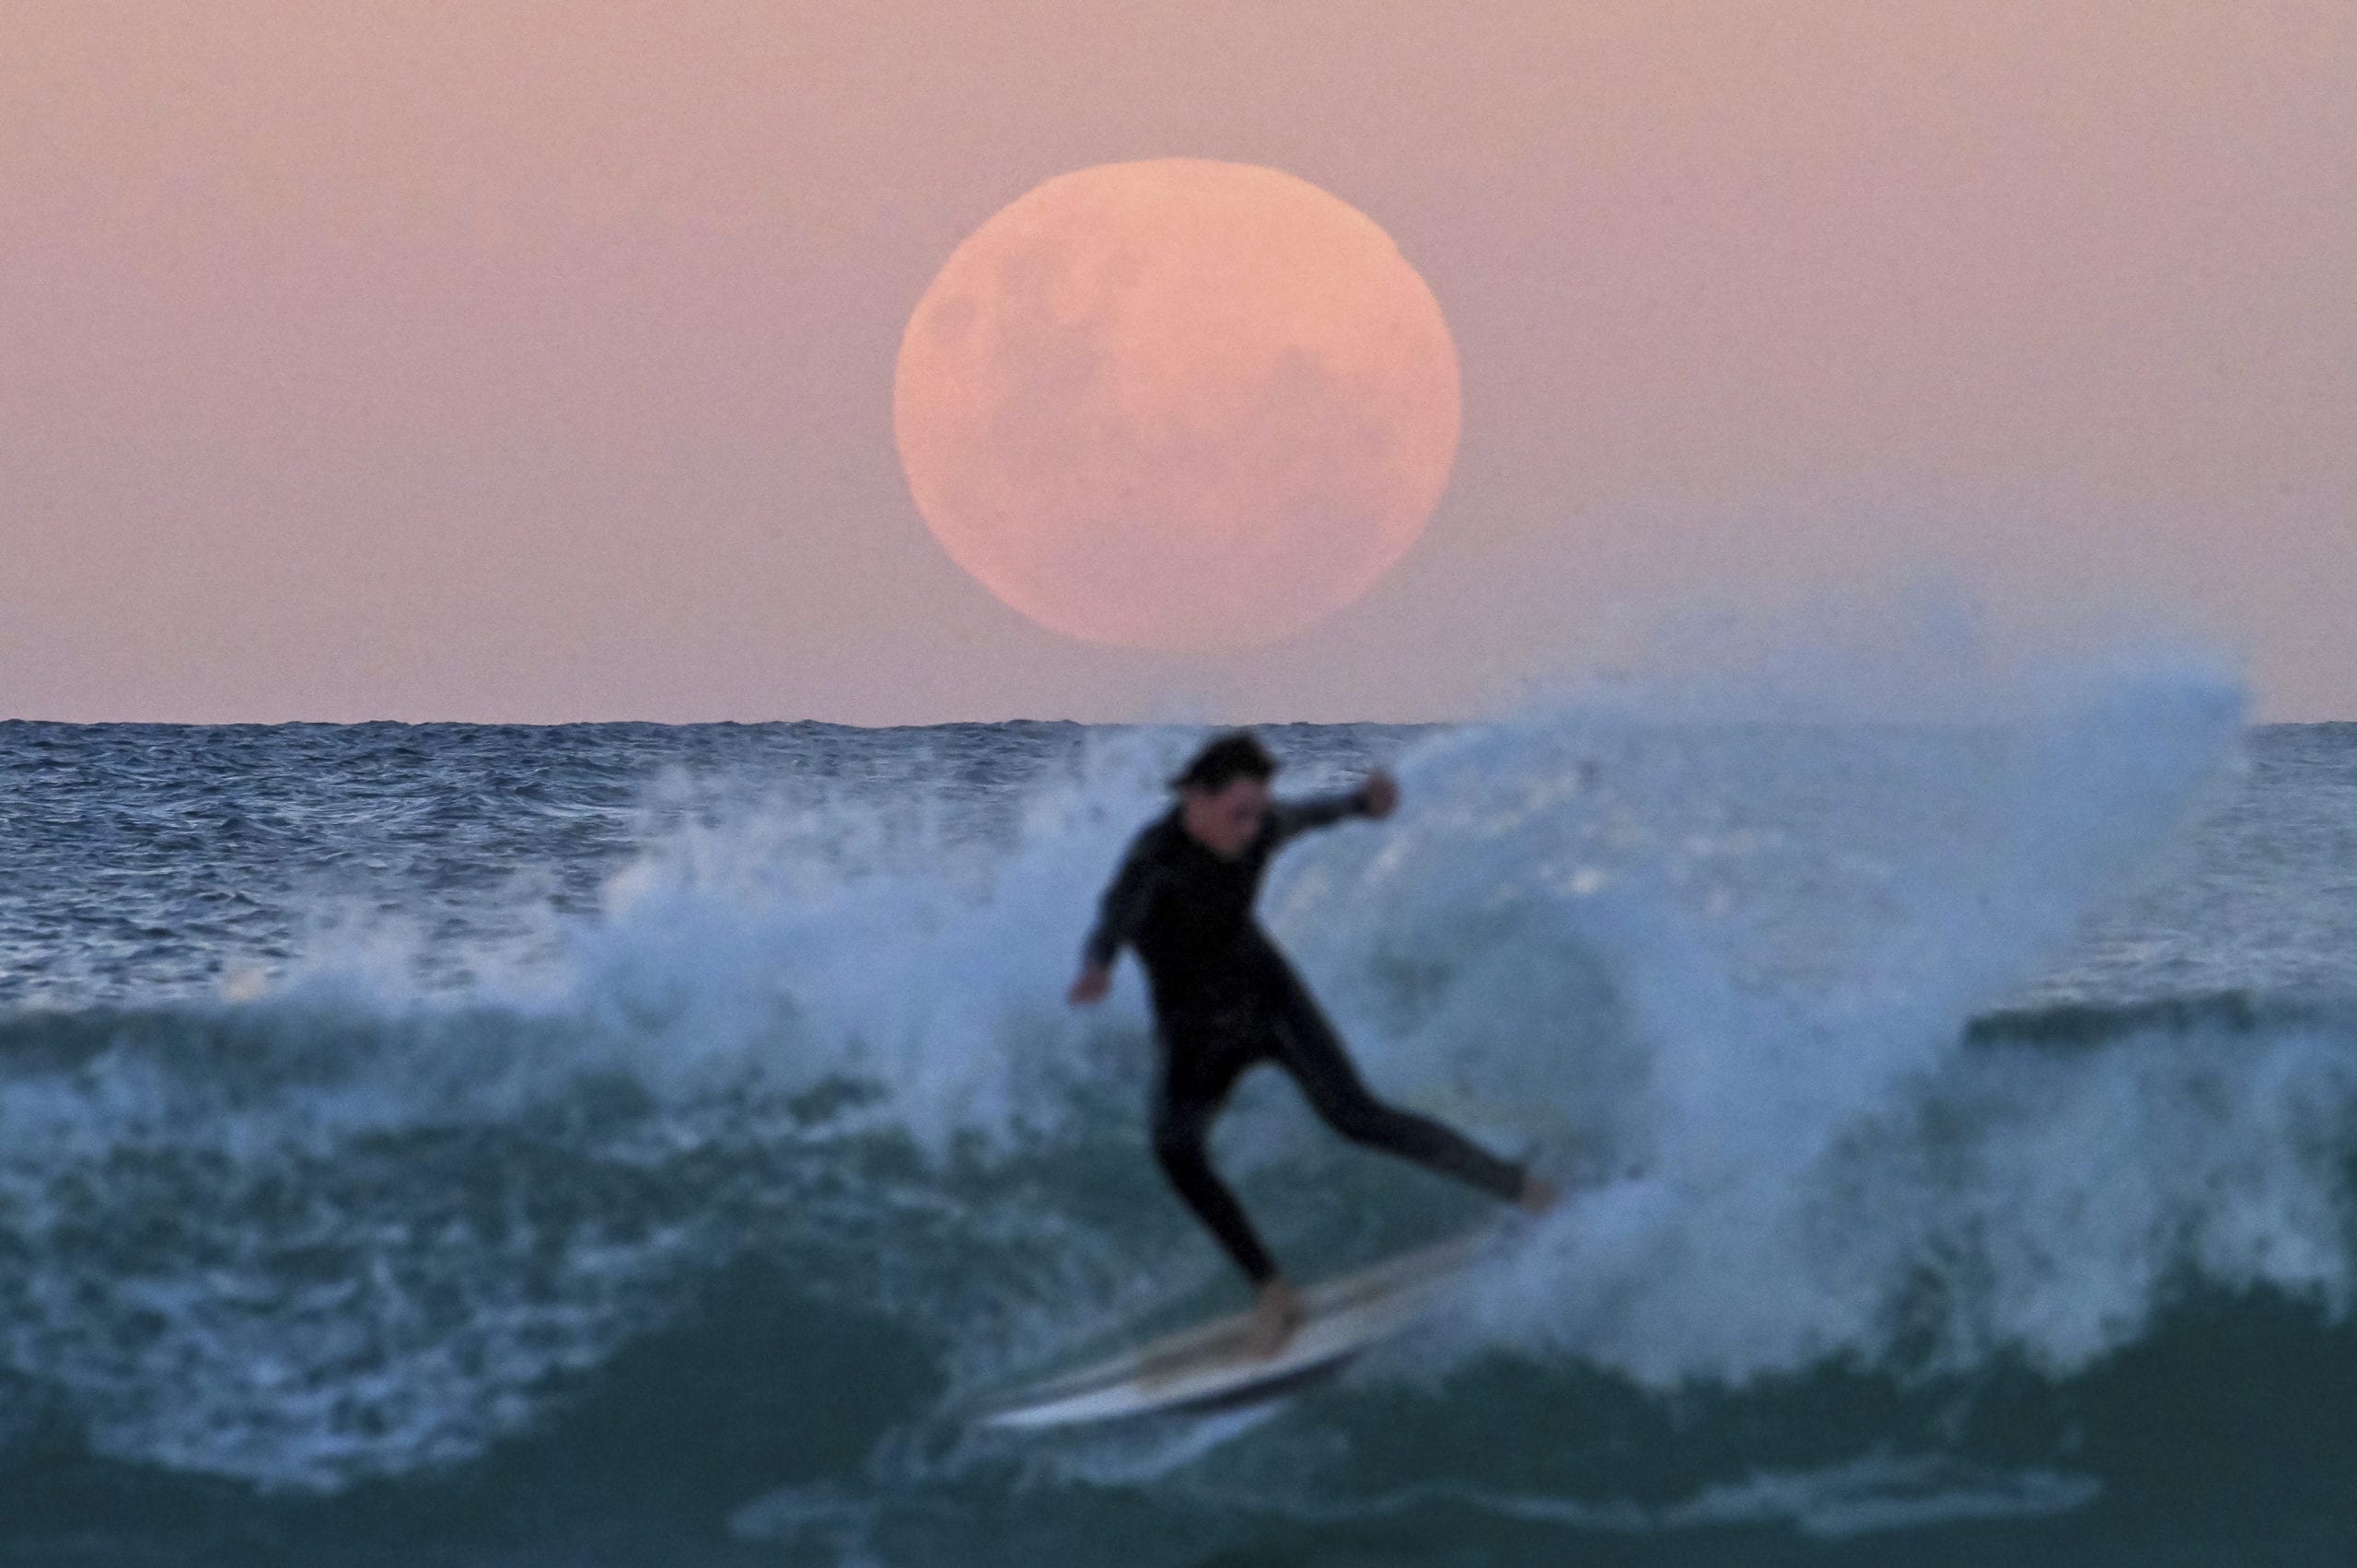 SYDNEY, AUSTRALIA - MAY 26: A surfer is seen as the "Super Flower Blood Moon" rises over the Pacific Ocean at Bondi Beach in Sydney, Australia on May 26, 2021. The "Super" moon observed in May is often defined as "flower moon" as well, mainly due to association with flowers blooming at this time of year. During the eclipse, the moon turns into a deep blood-red color, known as "blood moon." This celestial incident -- known as "Super Flower Blood Moon" -- is the only full lunar eclipse of this year. (Photo by Steven Saphore/Anadolu Agency via Getty Images)